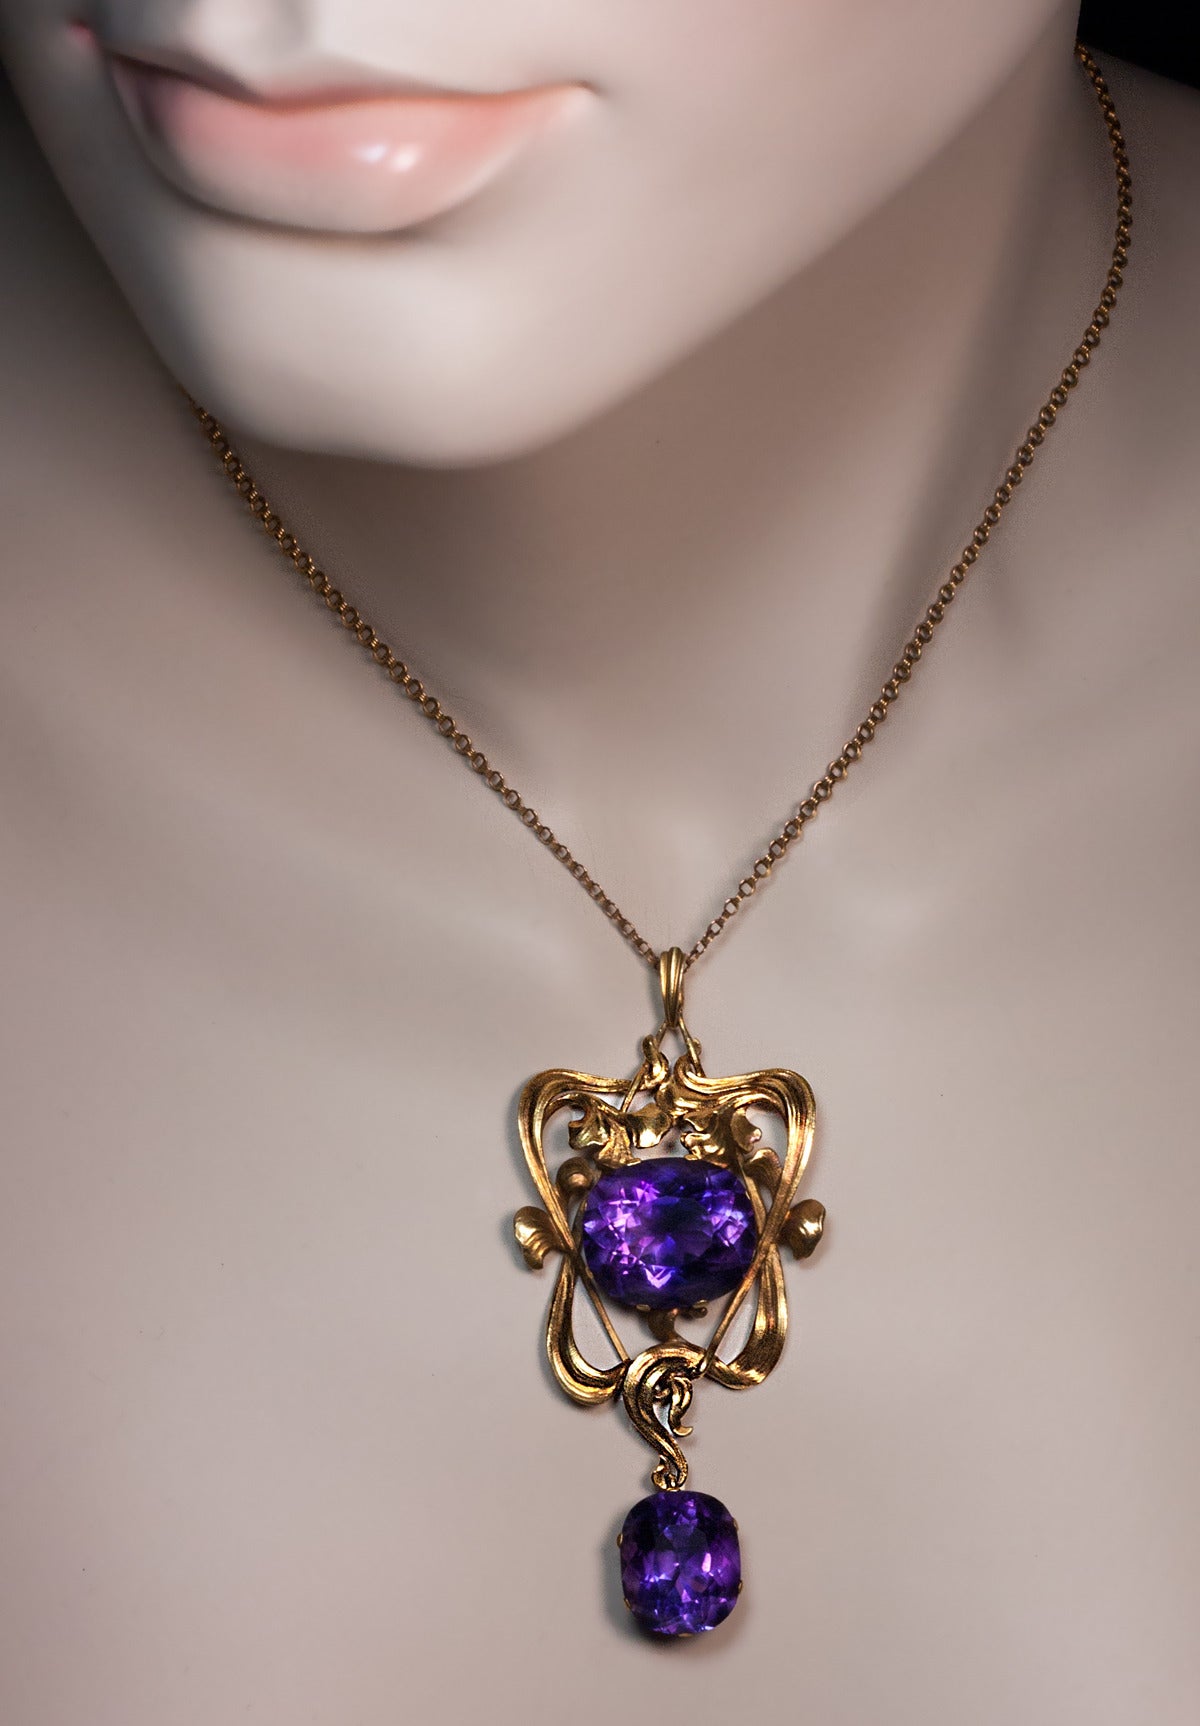 Made in Moscow between 1899 and 1908.

14K gold Art Nouveau pendant of an openwork floral design set with two superb Siberian amethysts - estimated weight 16.41 ct and 9.87 ct

marked with 56 zolotnik gold standard with initials of Moscow assay